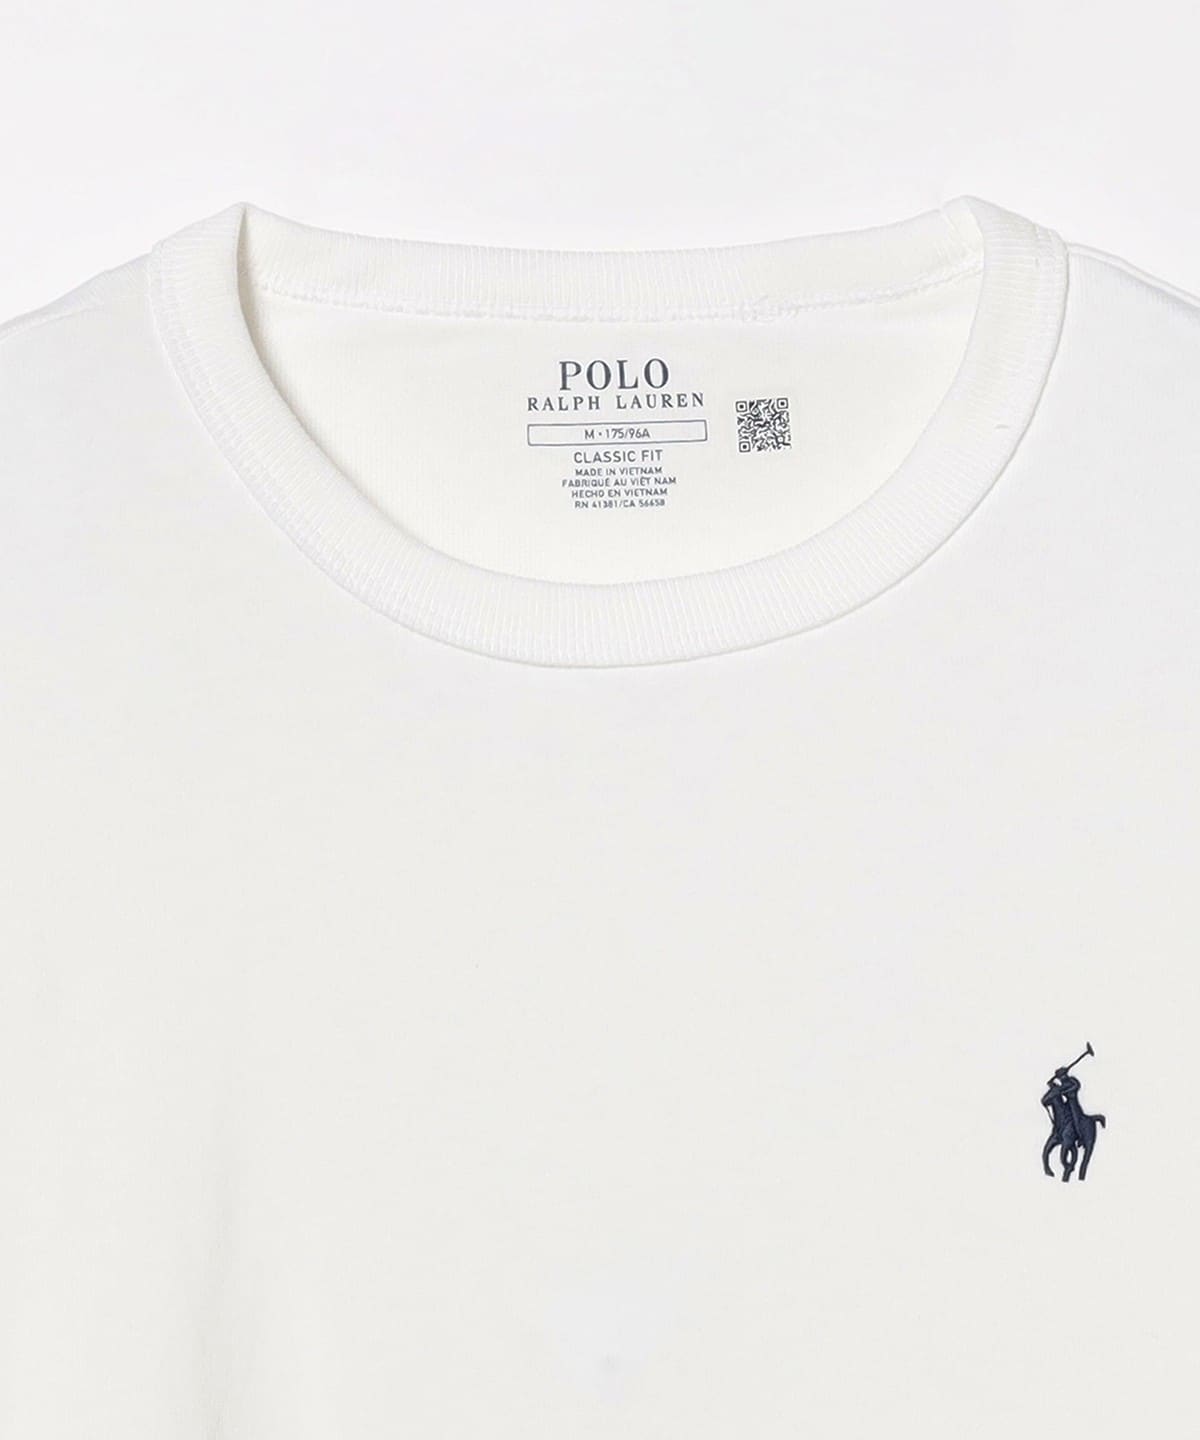 BEAMS（ビームス）POLO RALPH LAUREN / Classic Fit Long Sleeve Tee 